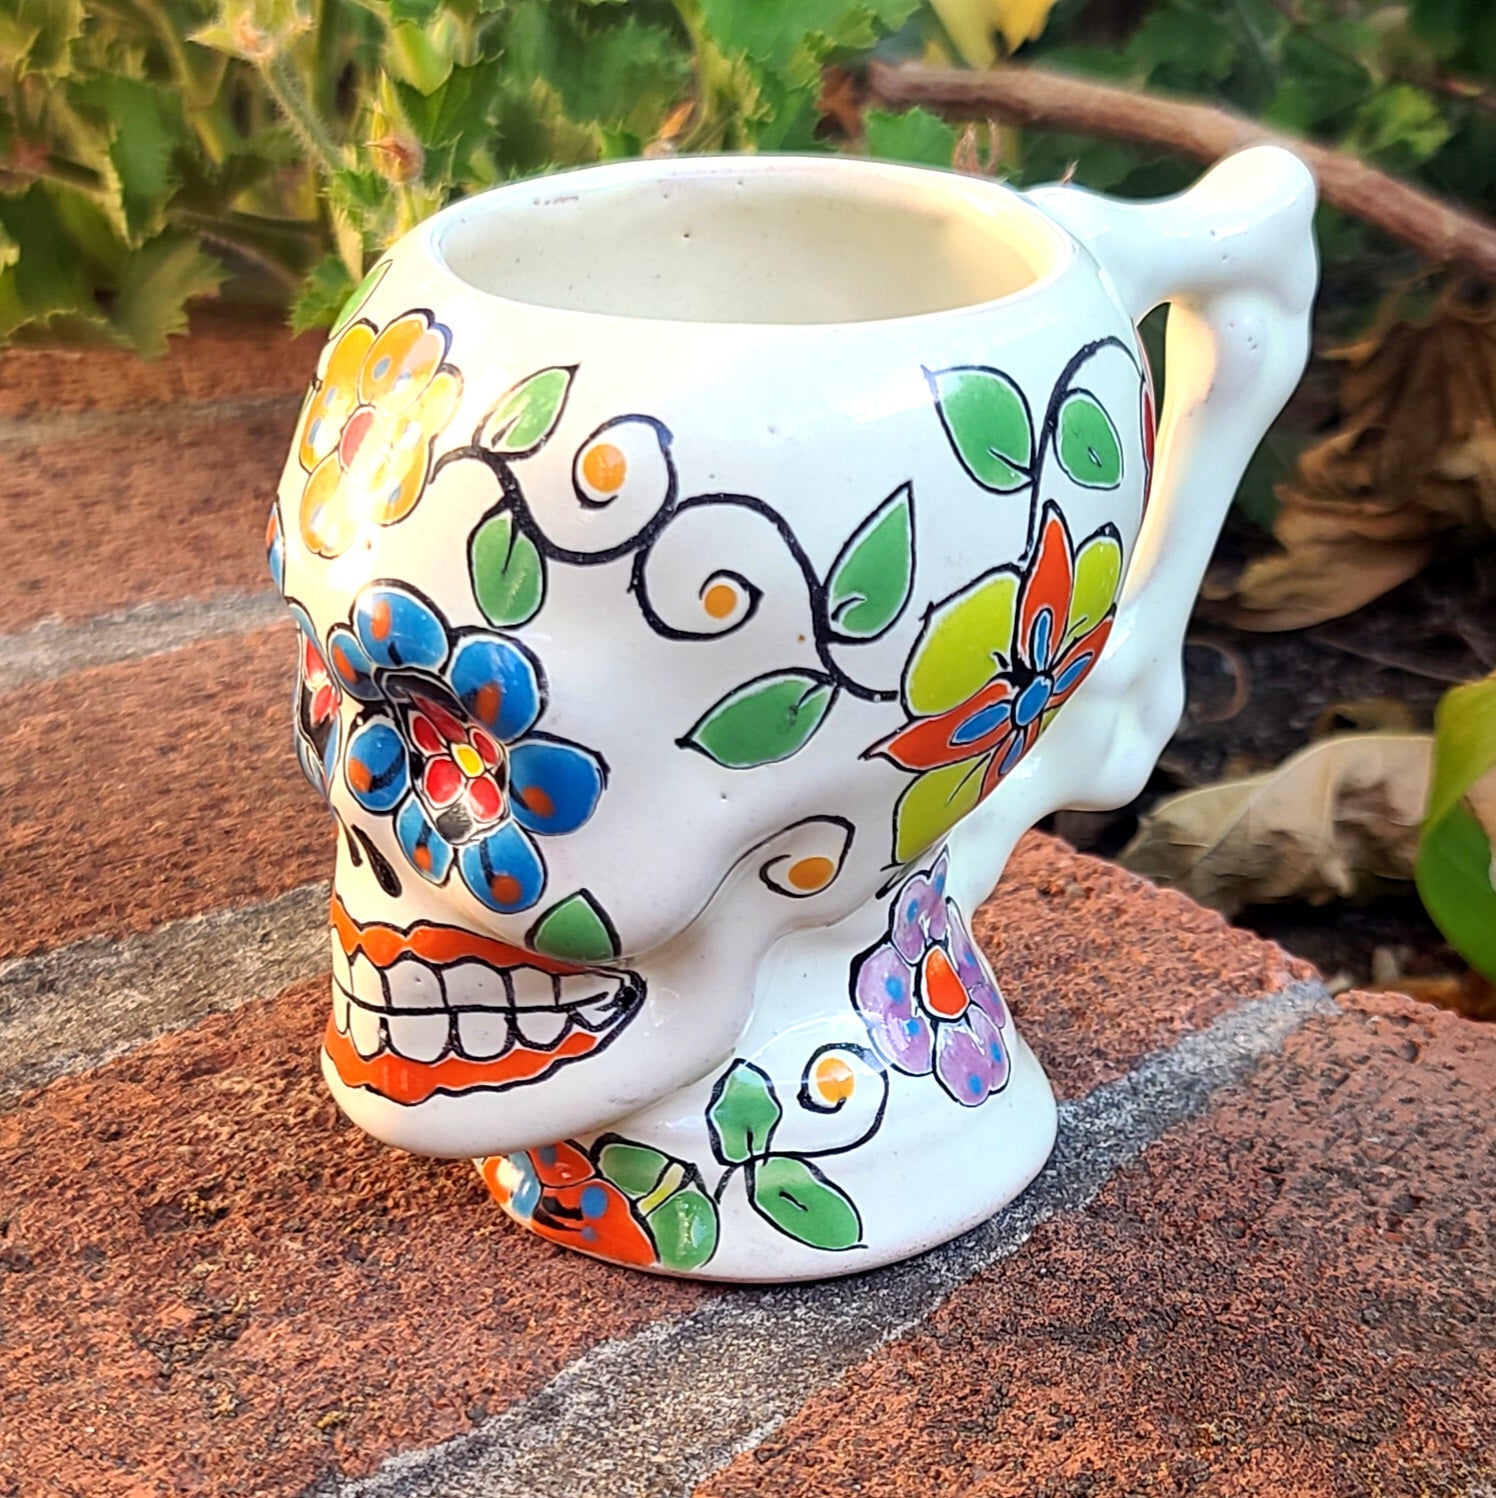 This skull shaped mug has a traditional Day of the Dead hand-painted design with a bone handle perfect to gets your bones moving in the morning.  